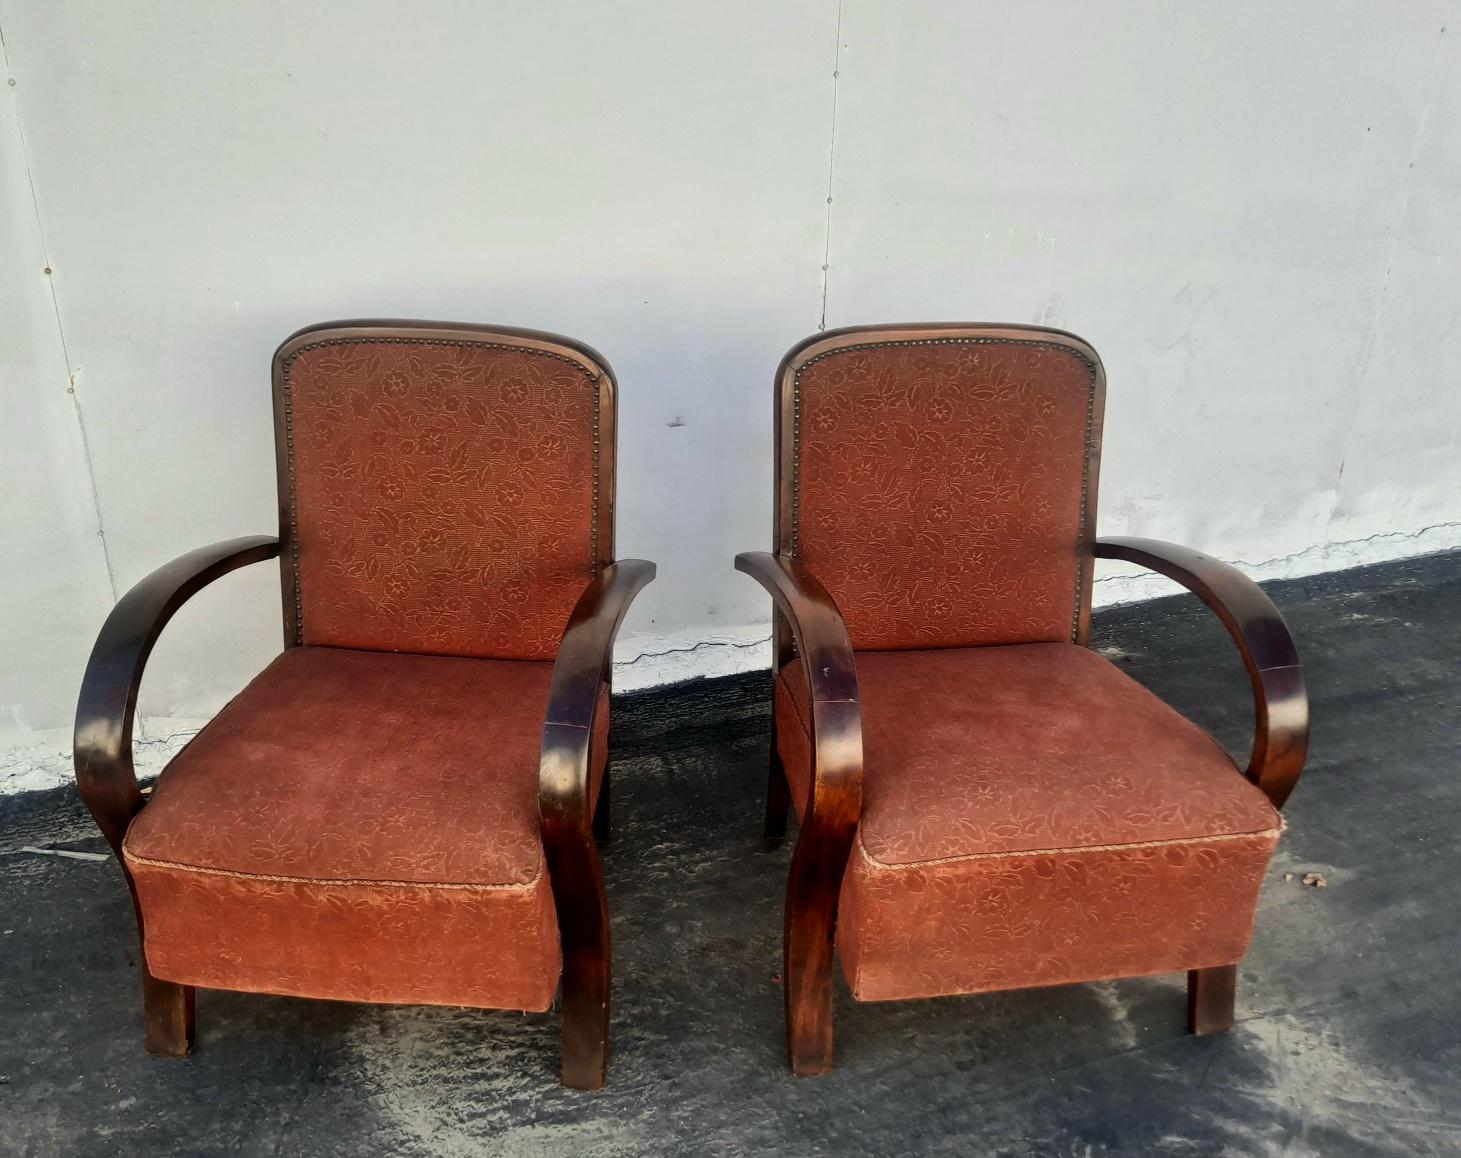 French Art Deco arm chairs .
the chairs are in good original condition but we recommend upholstery. Chairs are on the walnut wood frame. We ofer refinishing and reupholstery service.